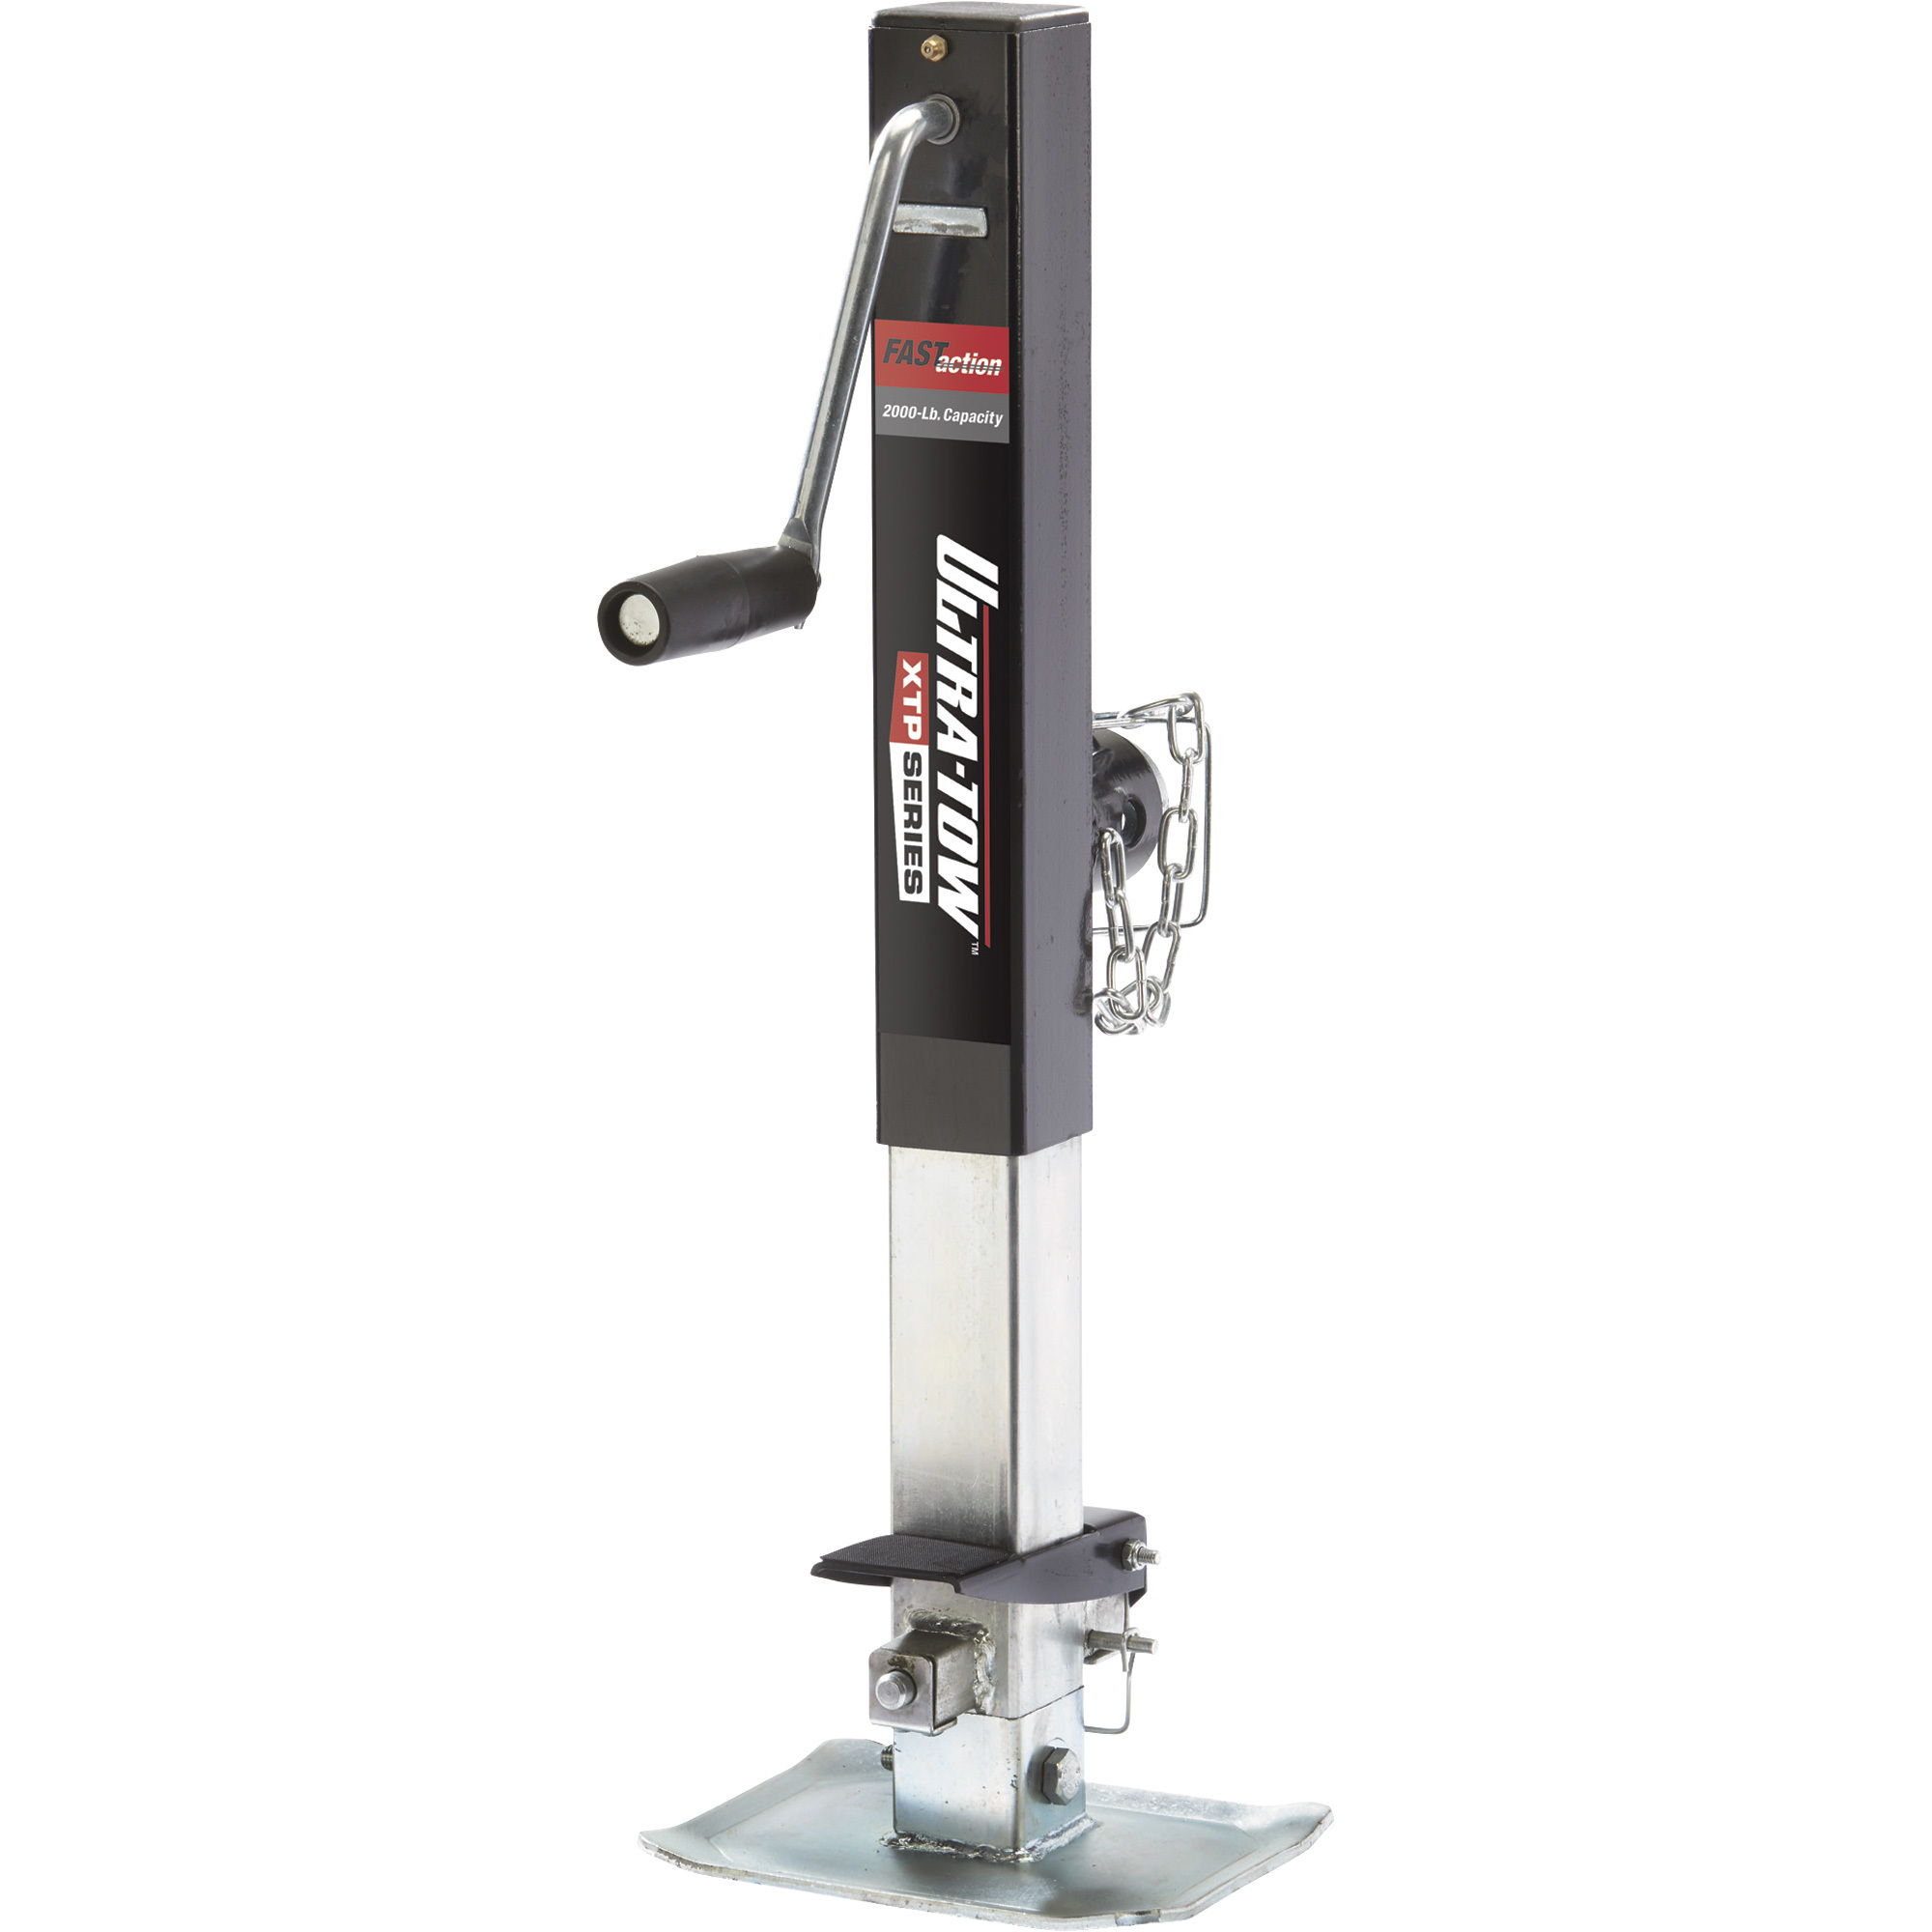 Ultra-Tow XTP Fast Action Square Tube Trailer Jack â 2000-Lb., Sidewind, Tube Mount, Weld-On